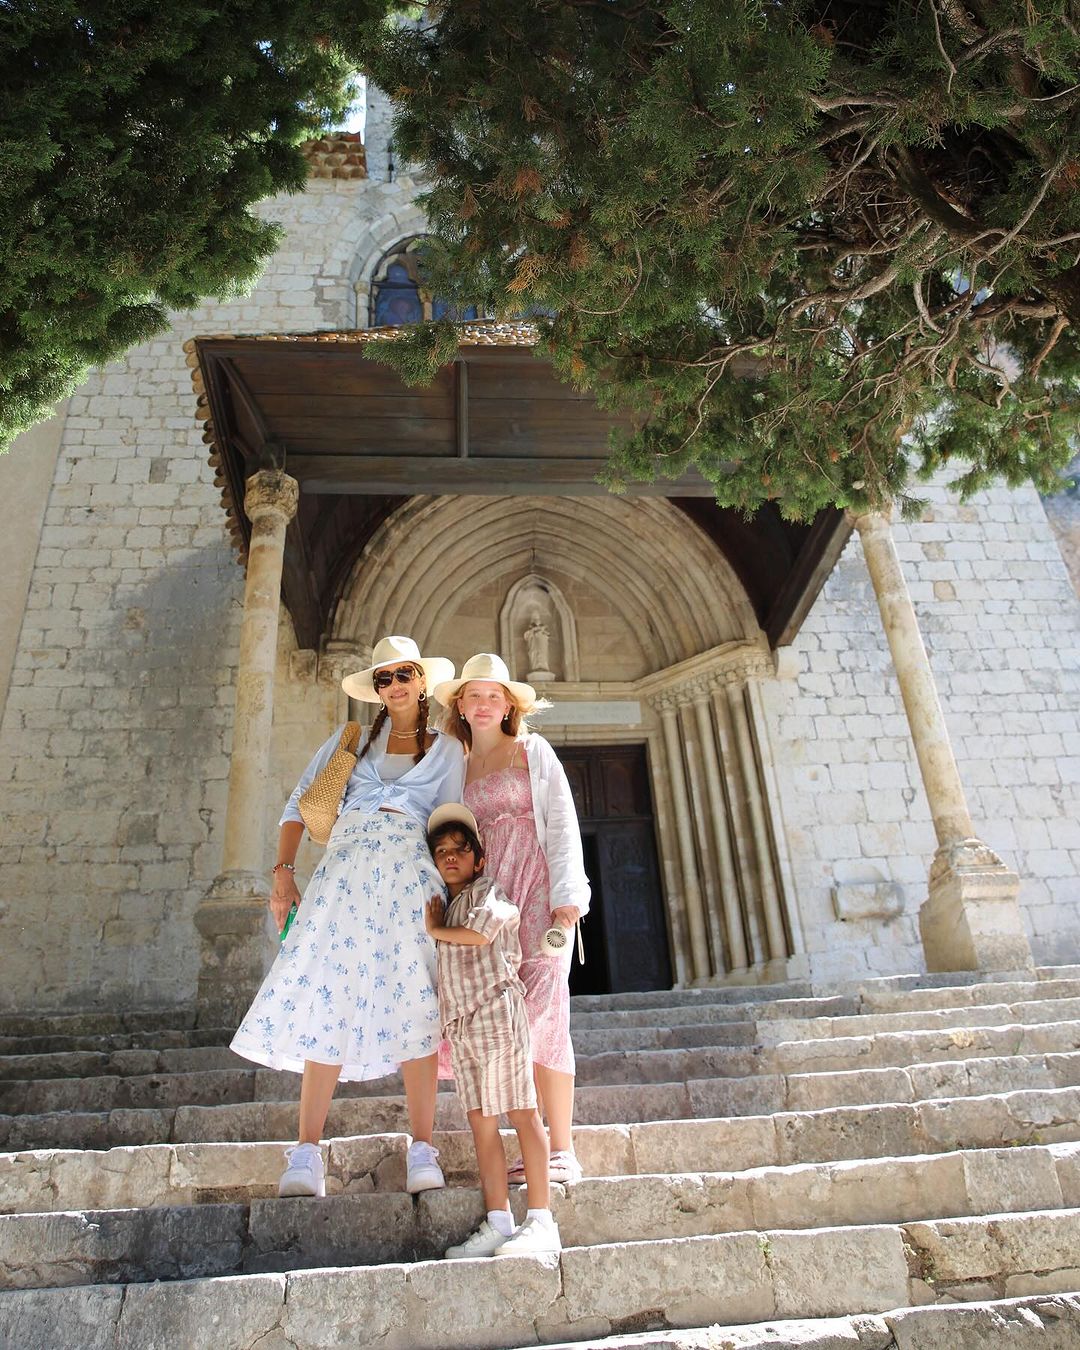 Jessica Alba with her daughter Haven and son Hayes on the steps of an old church